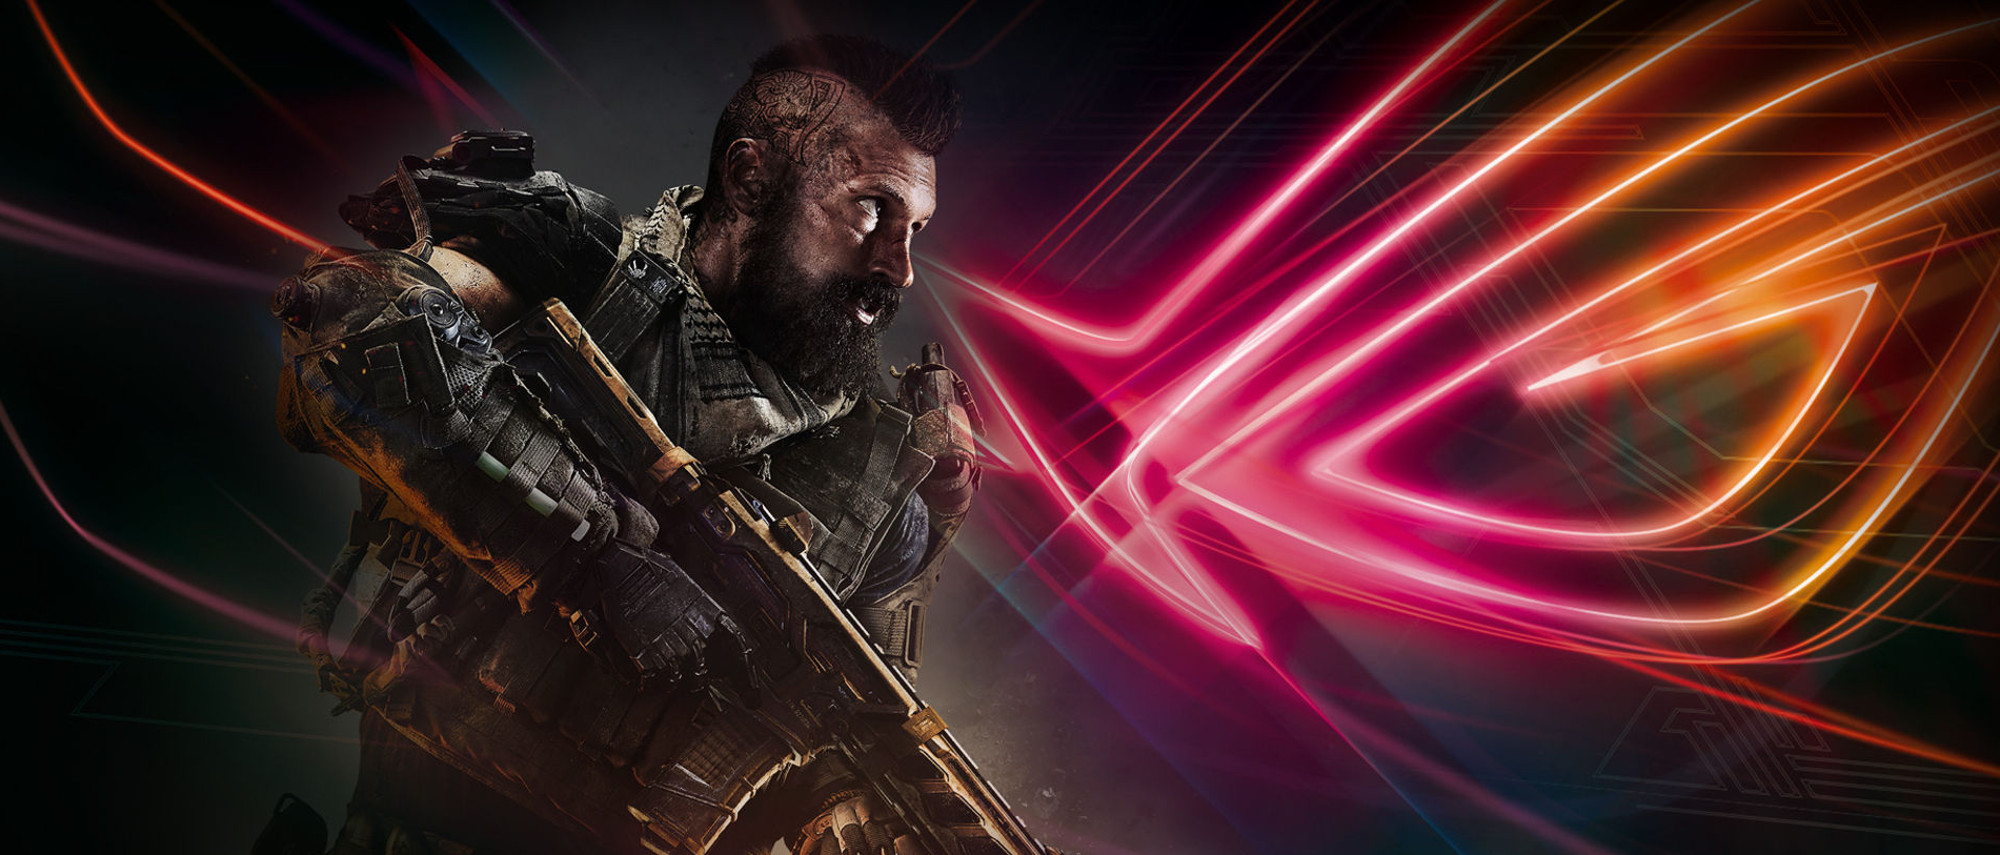 Gear up for Call of Duty: Black Ops 4® with special edition Call of Duty-branded  hardware from ROG